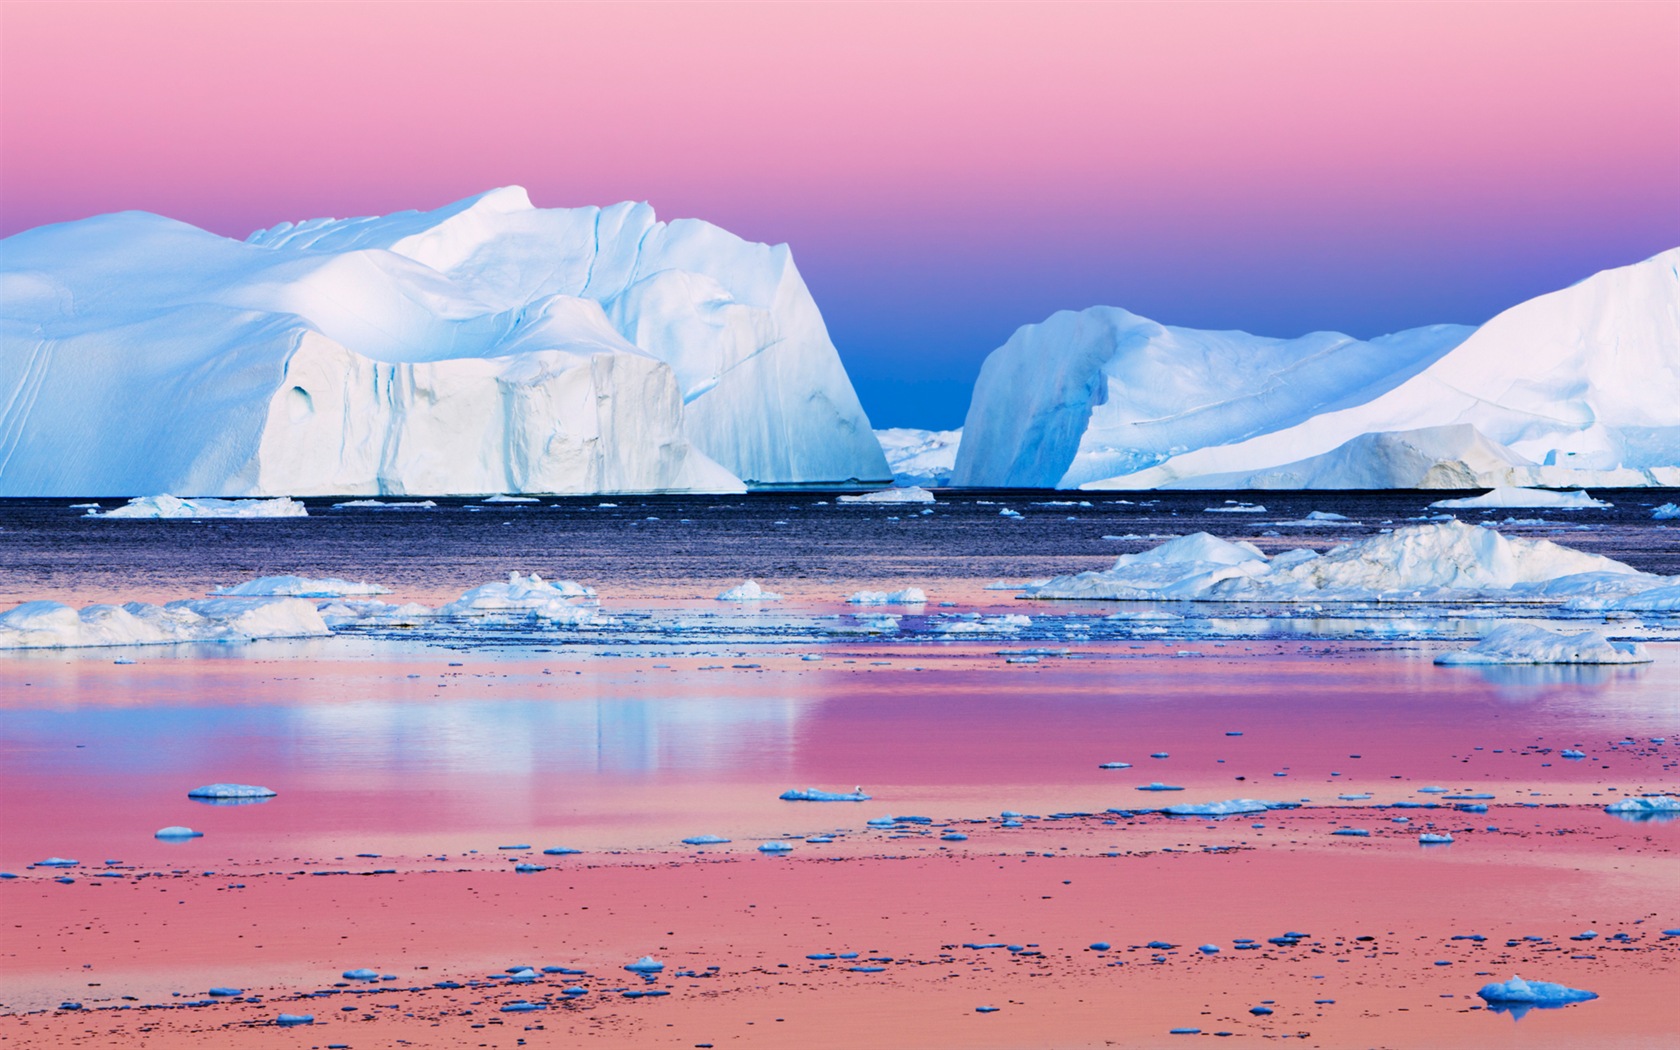 Windows 8 Wallpapers: Arctic, the nature ecological landscape, arctic animals #7 - 1680x1050